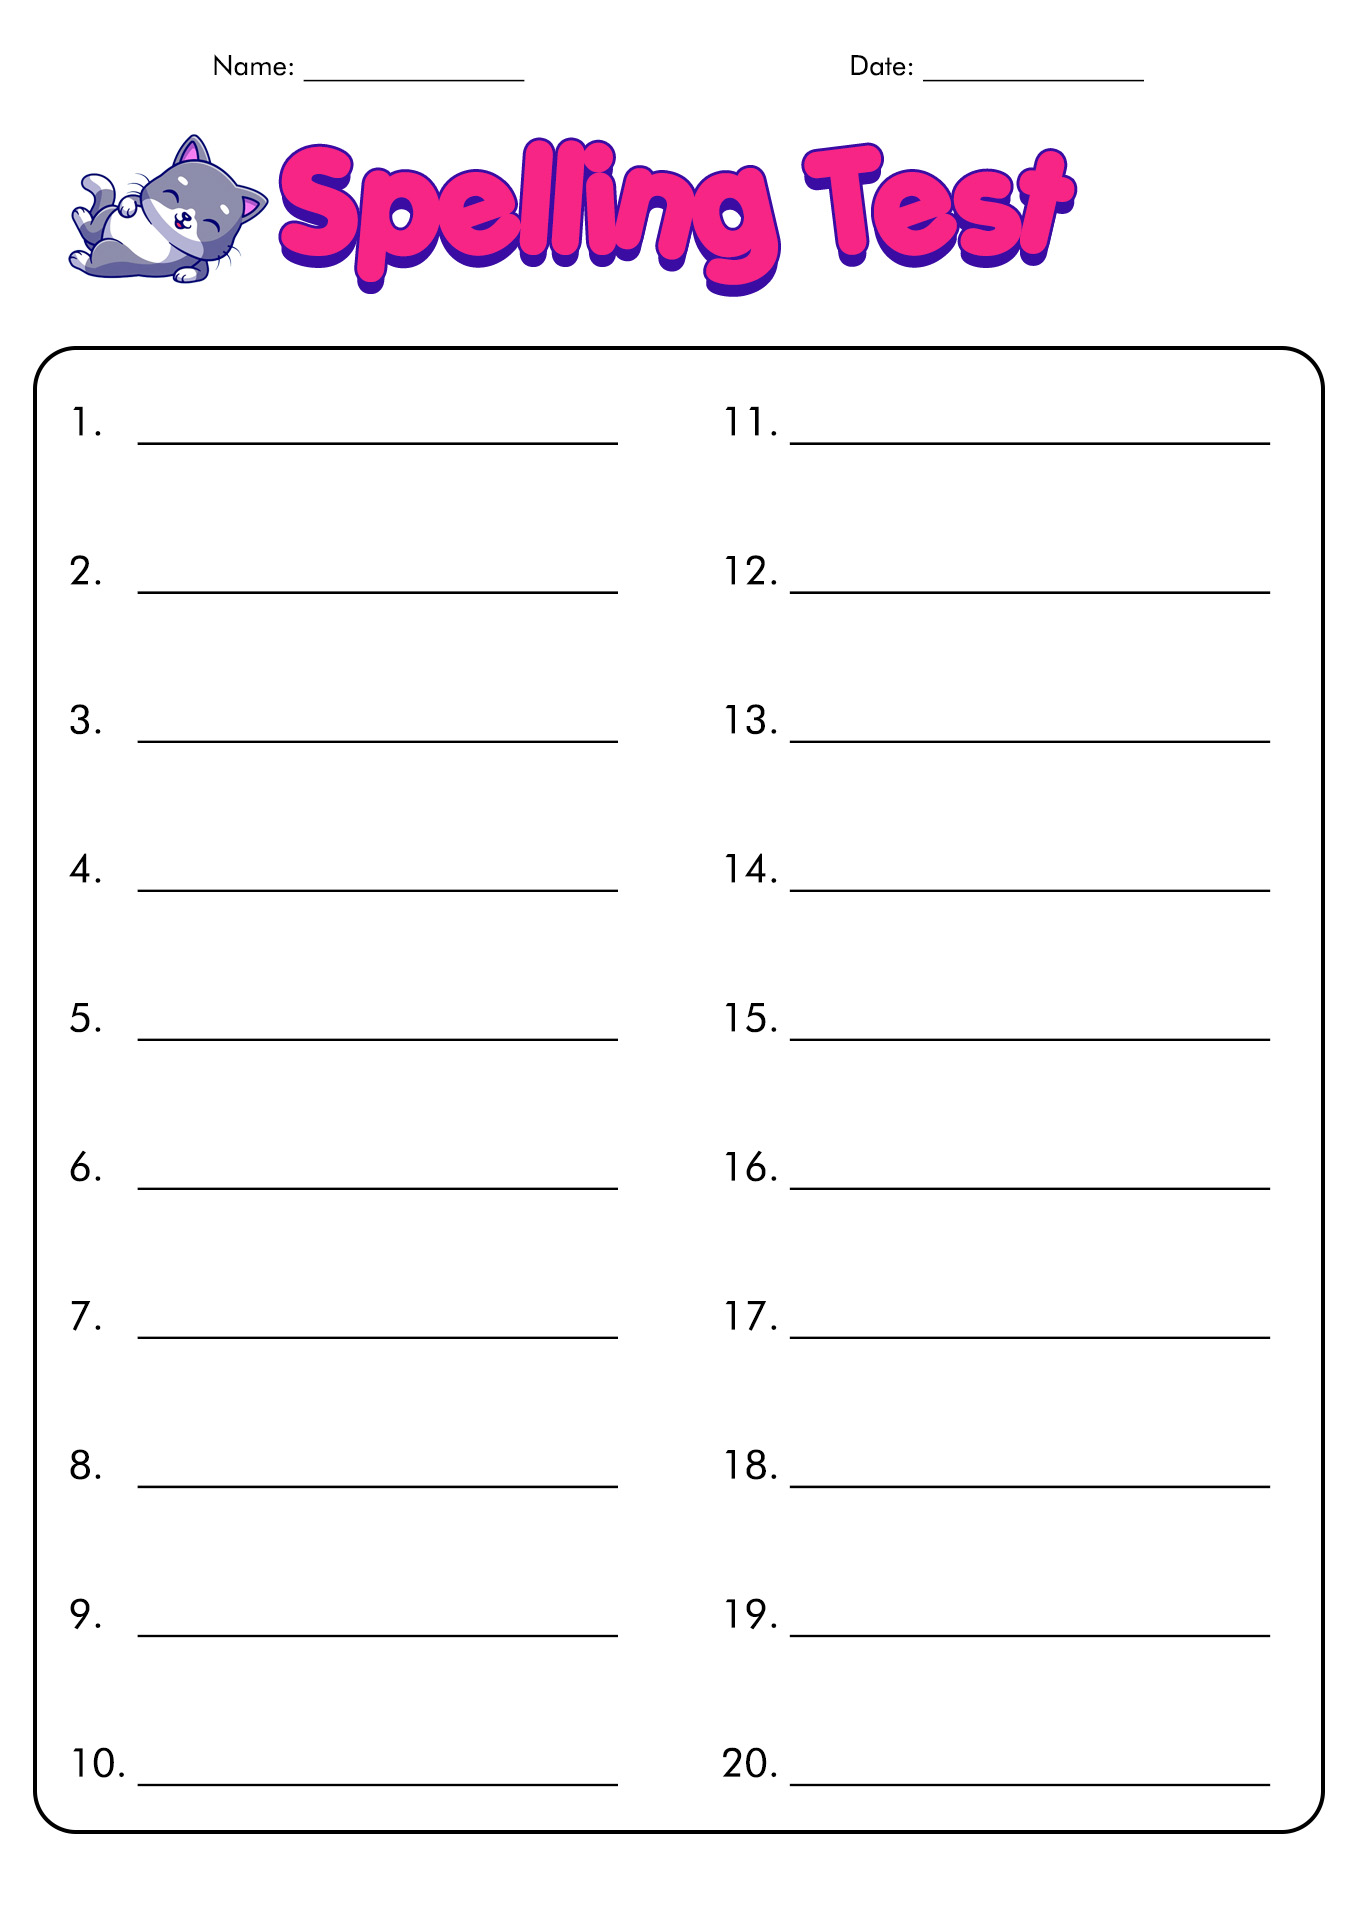 Spelling Test Paper Template Image